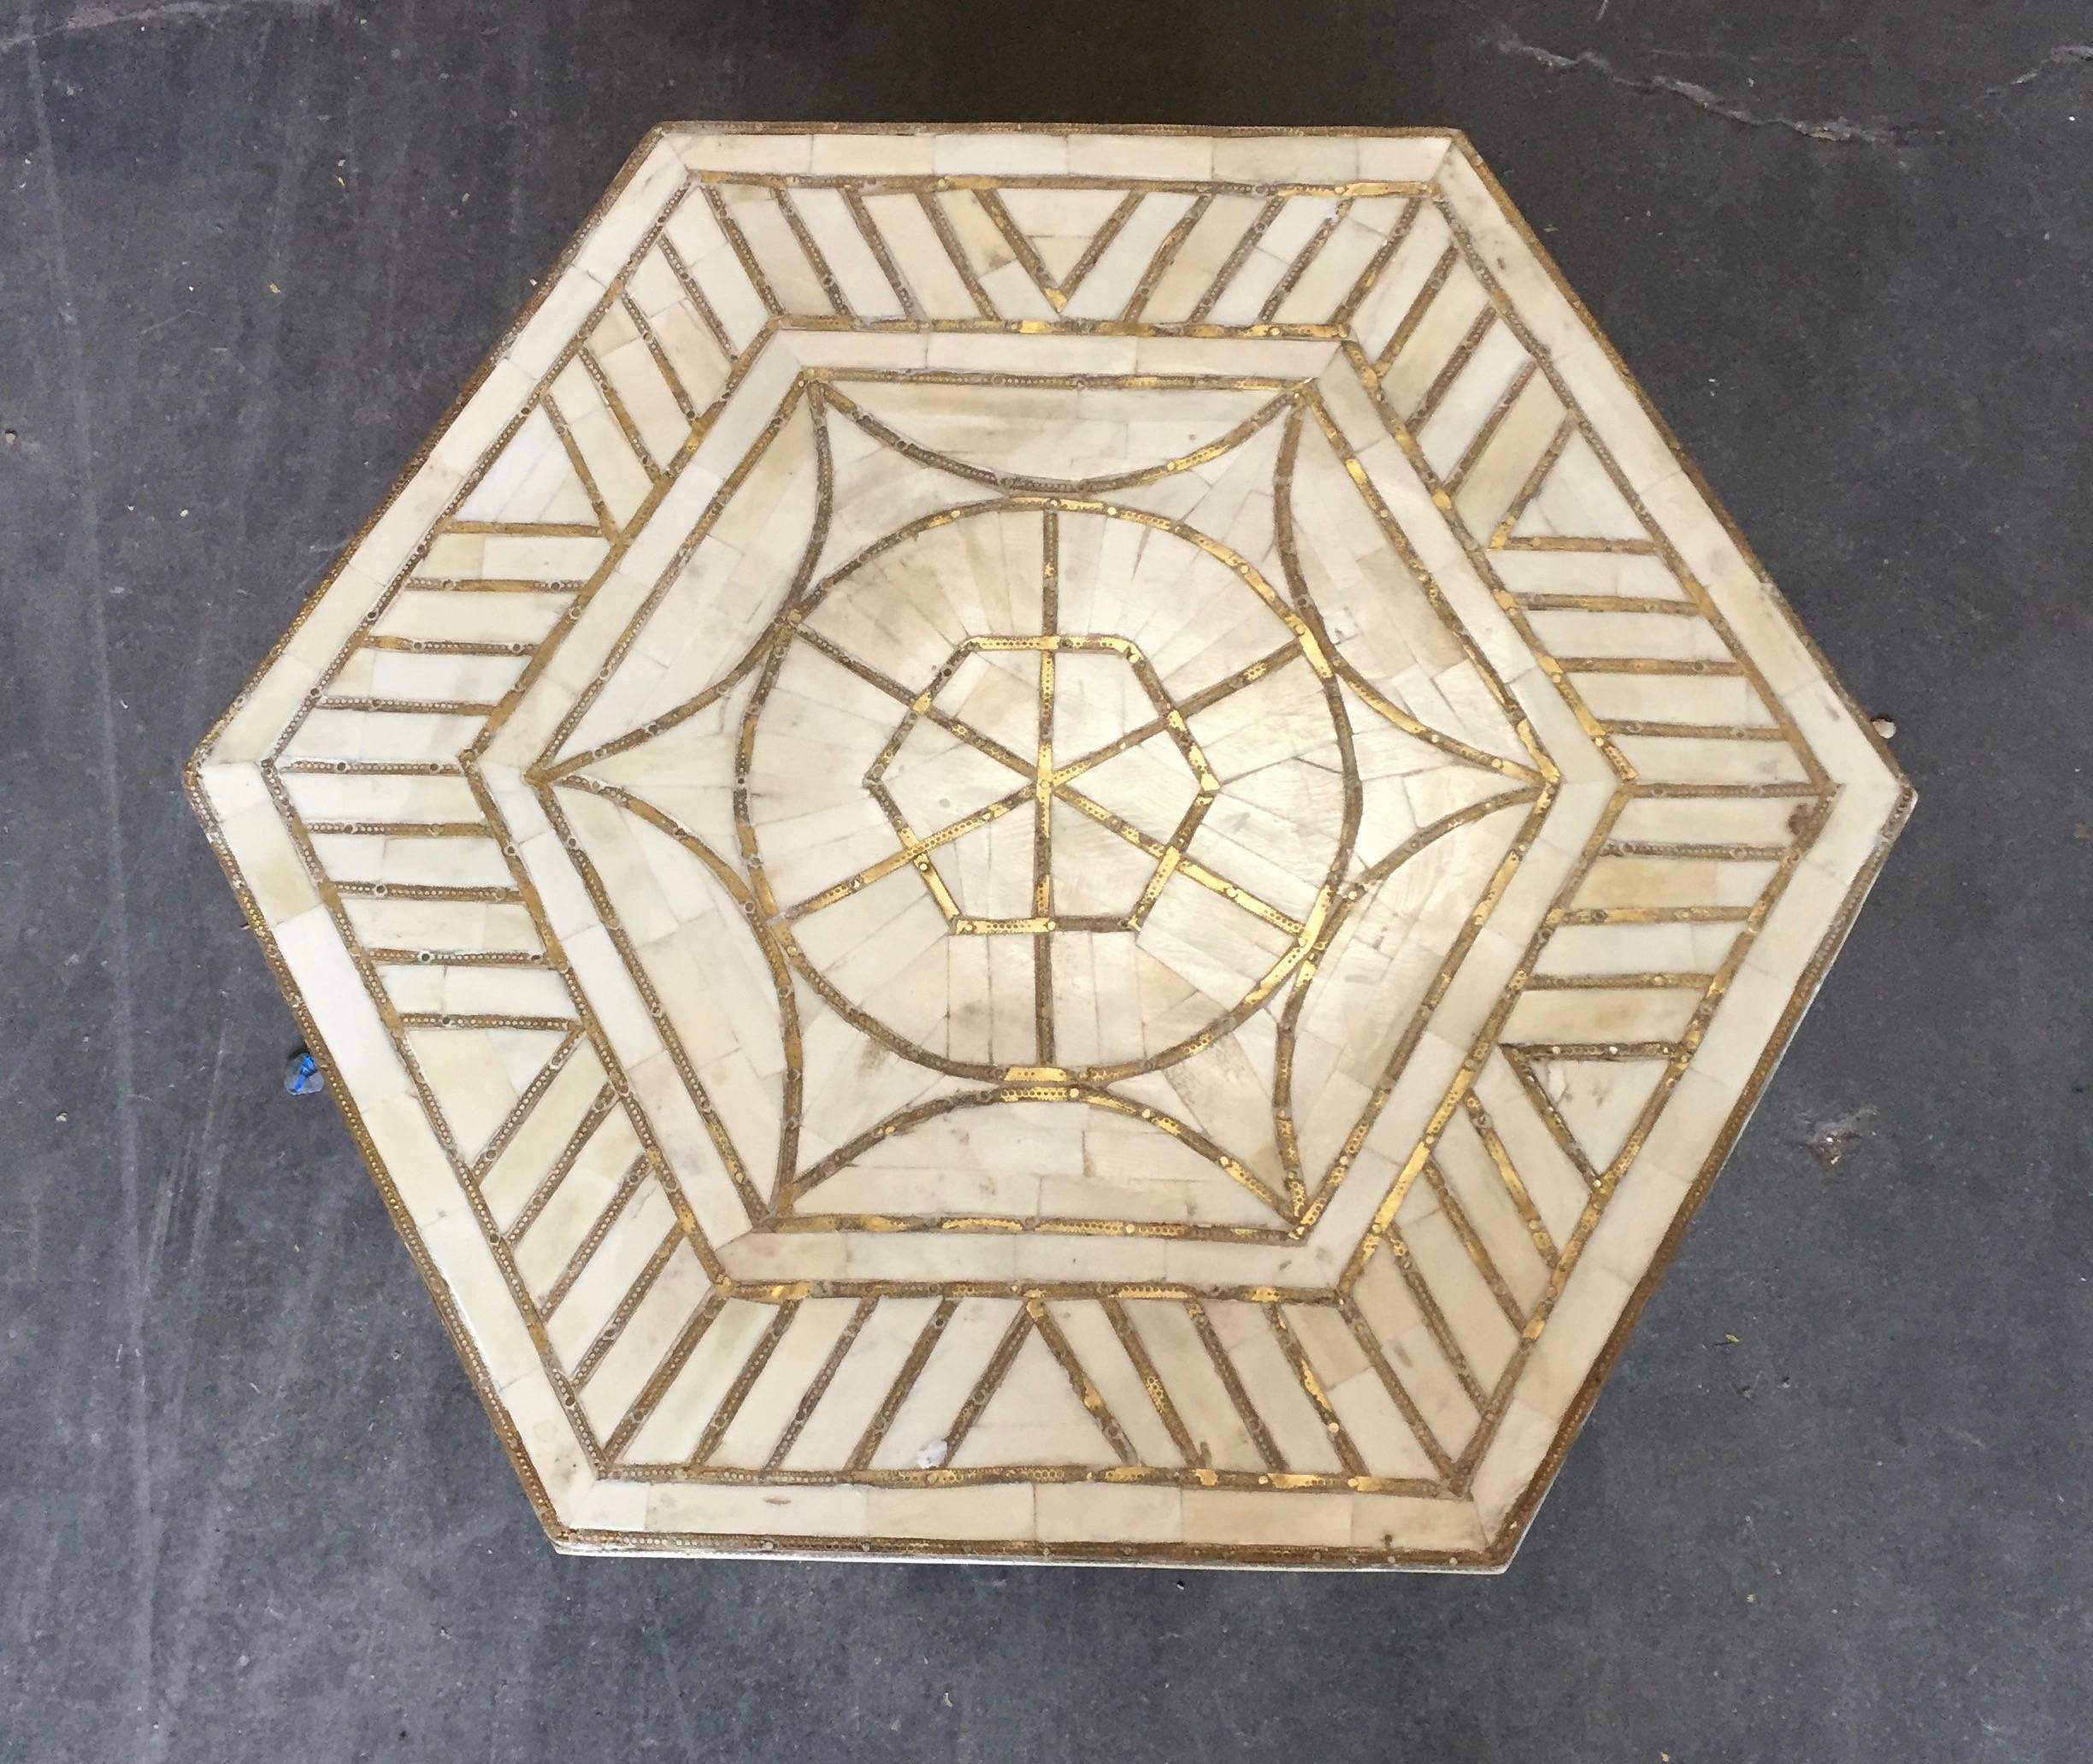 Bone and brass inlay side table with brass inlay in geometric designs. This is the smaller size. Pair available.